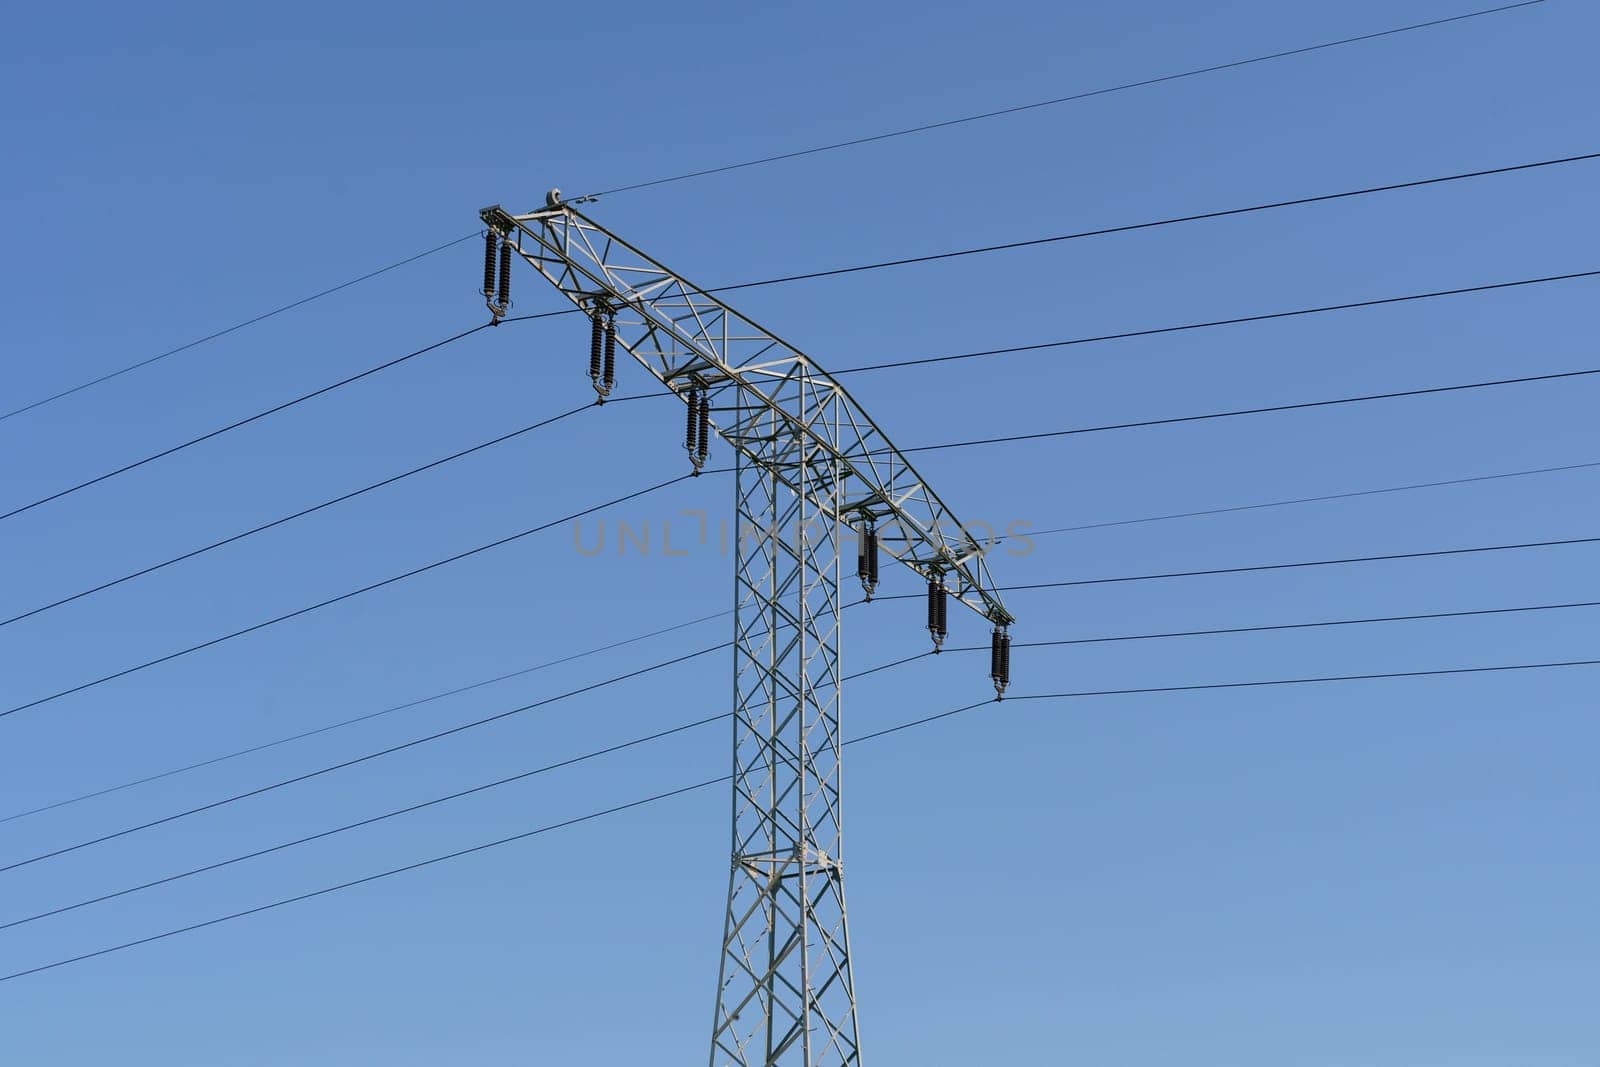 A high voltage power line towers against a clear blue sky, carrying electricity across the landscape.